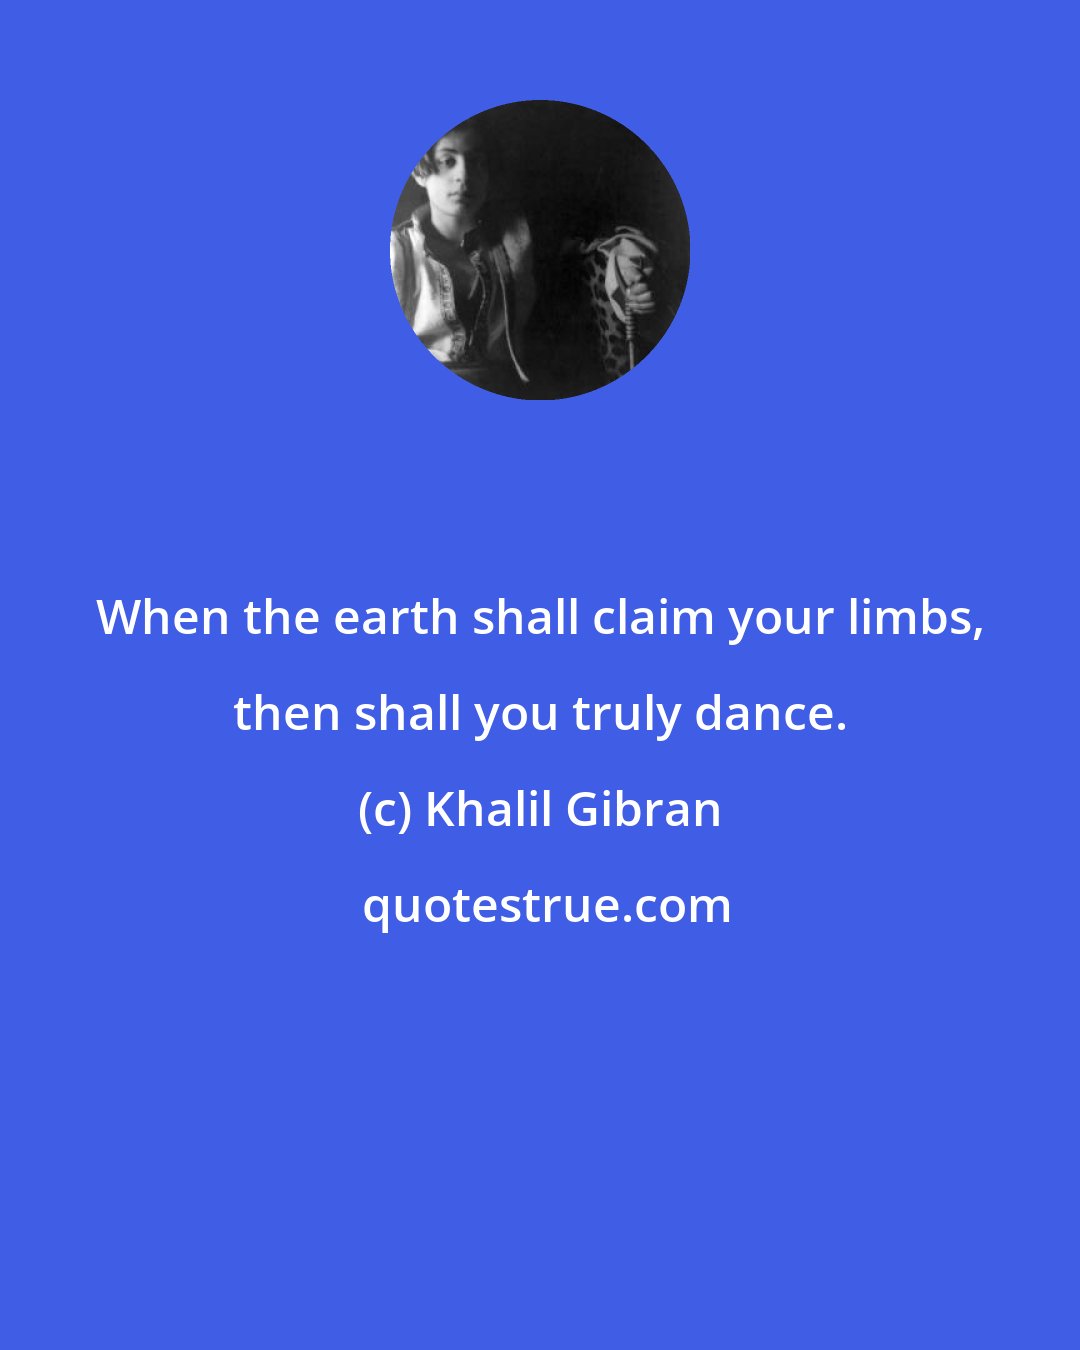 Khalil Gibran: When the earth shall claim your limbs, then shall you truly dance.